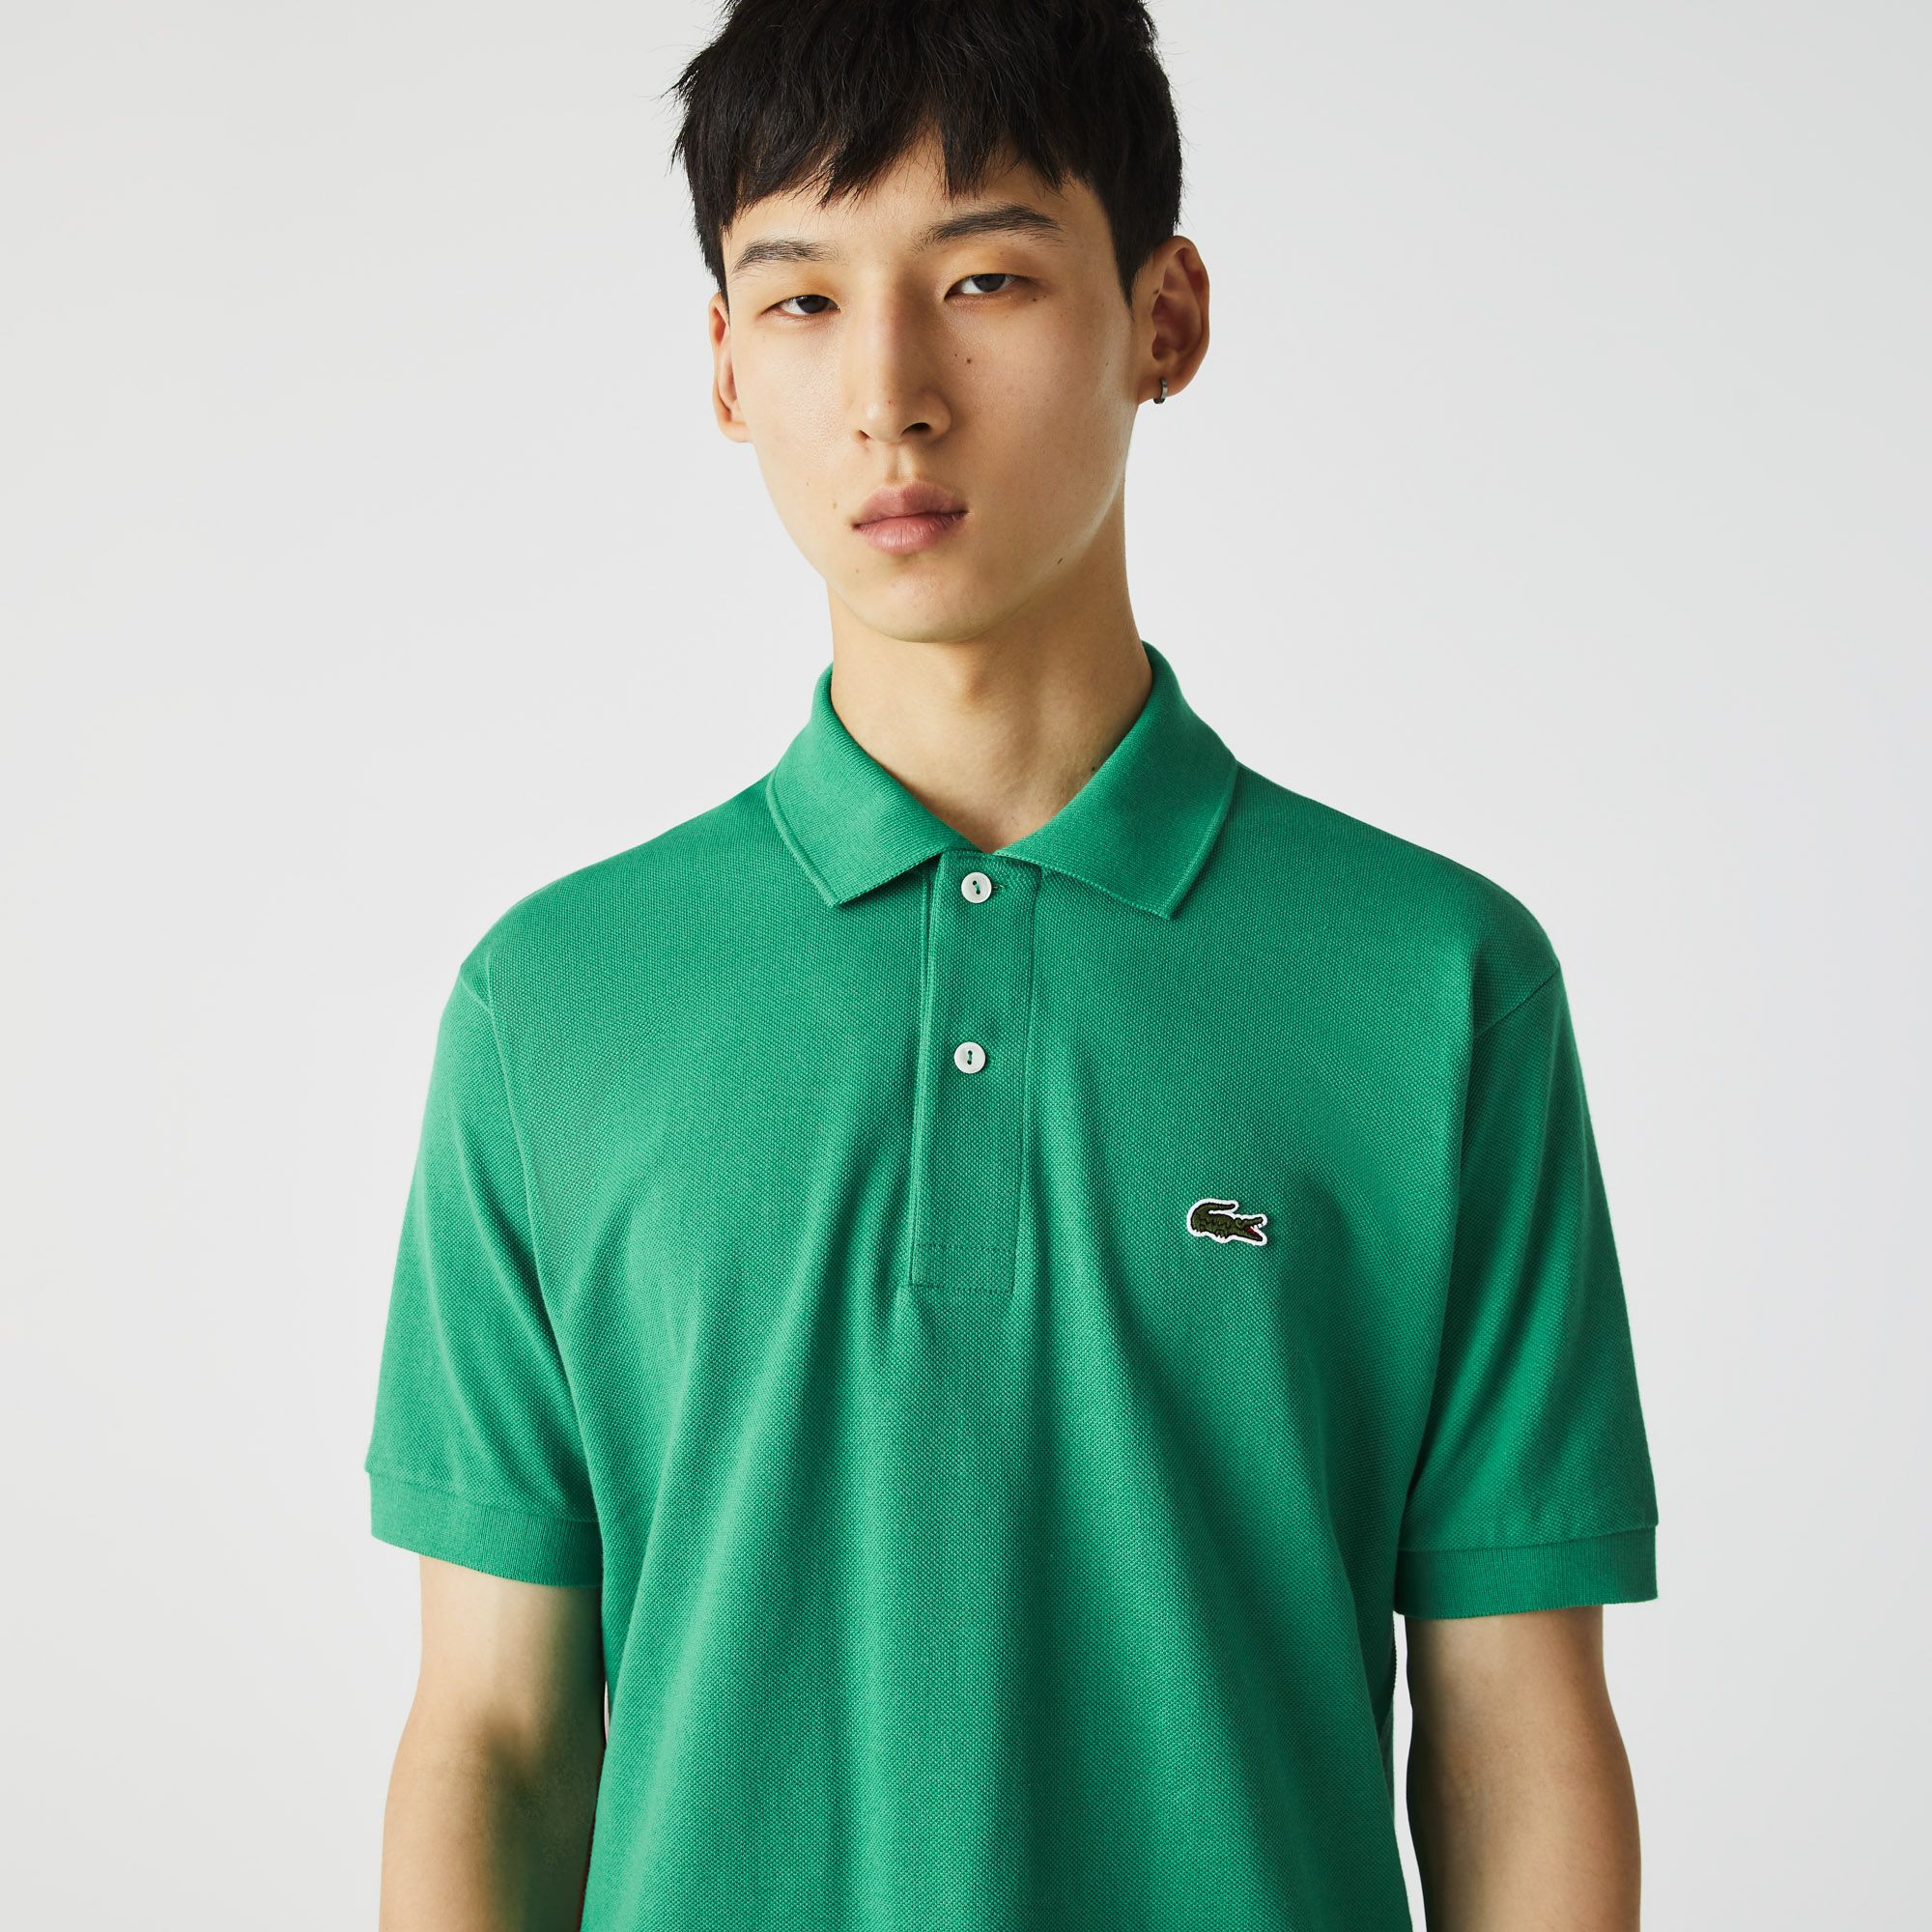  Lacoste Classic Fit L.12.12 Polo Shirt - Green 